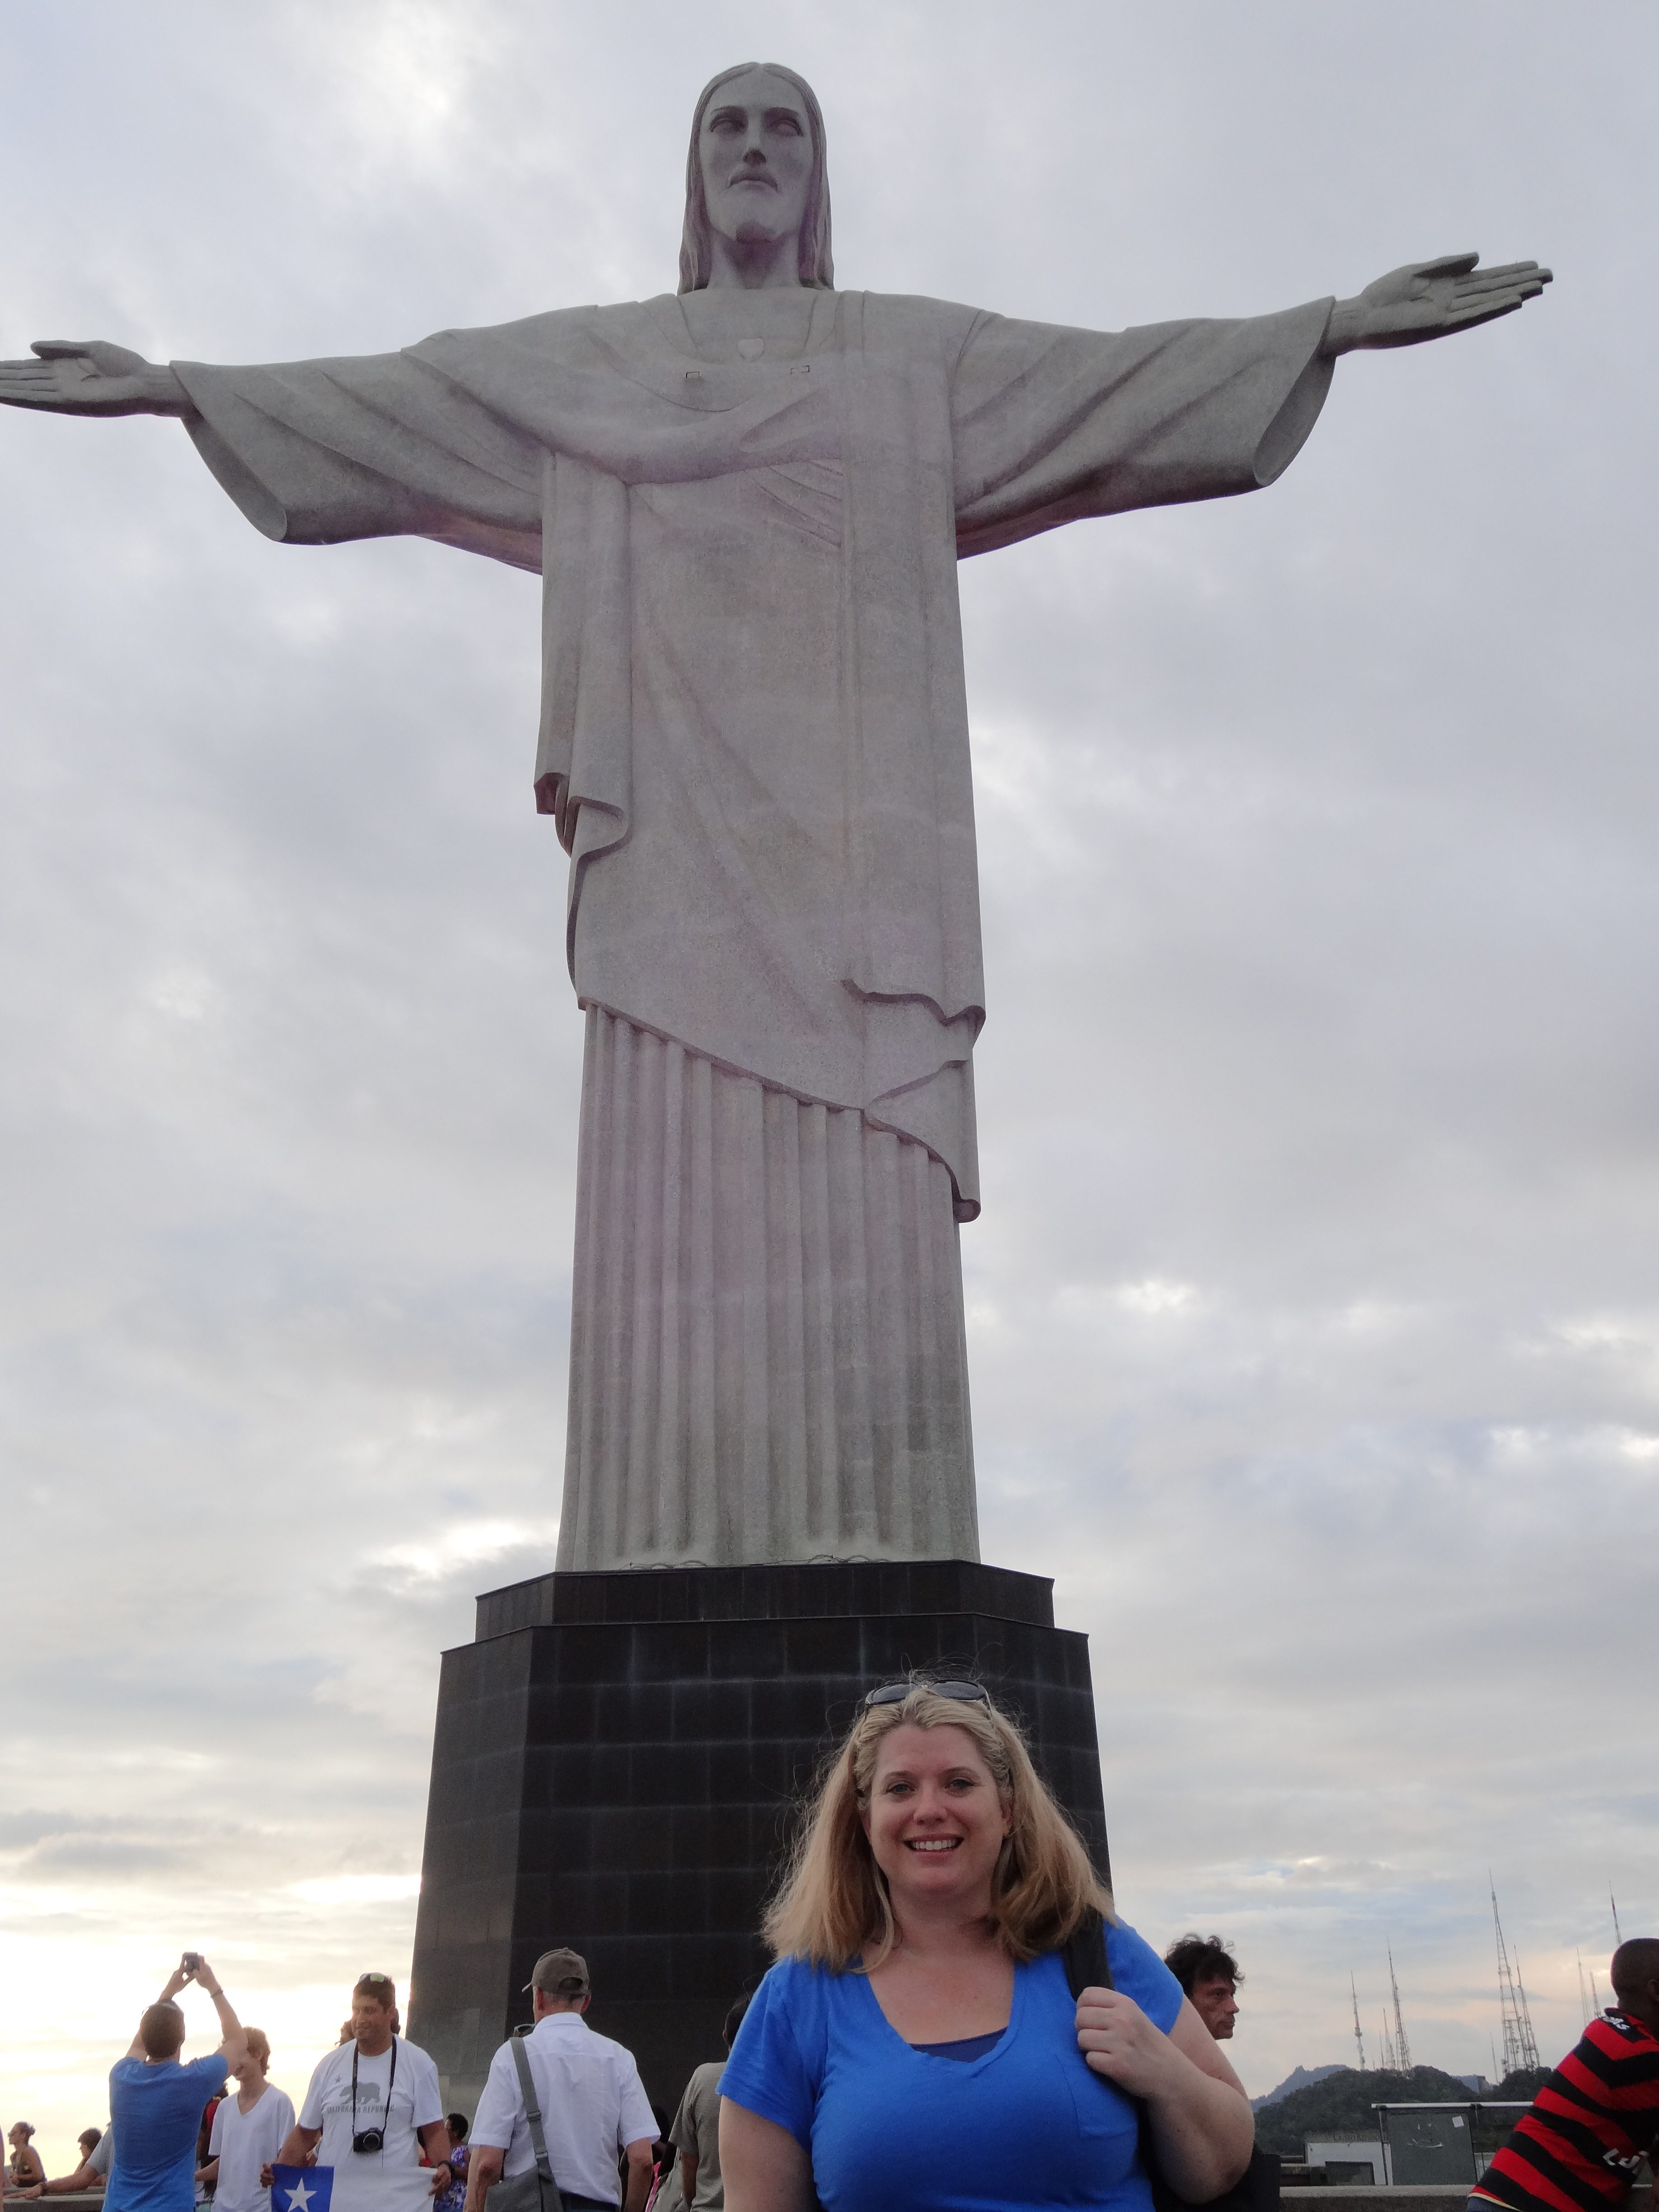 Me at the Christ Redeemer